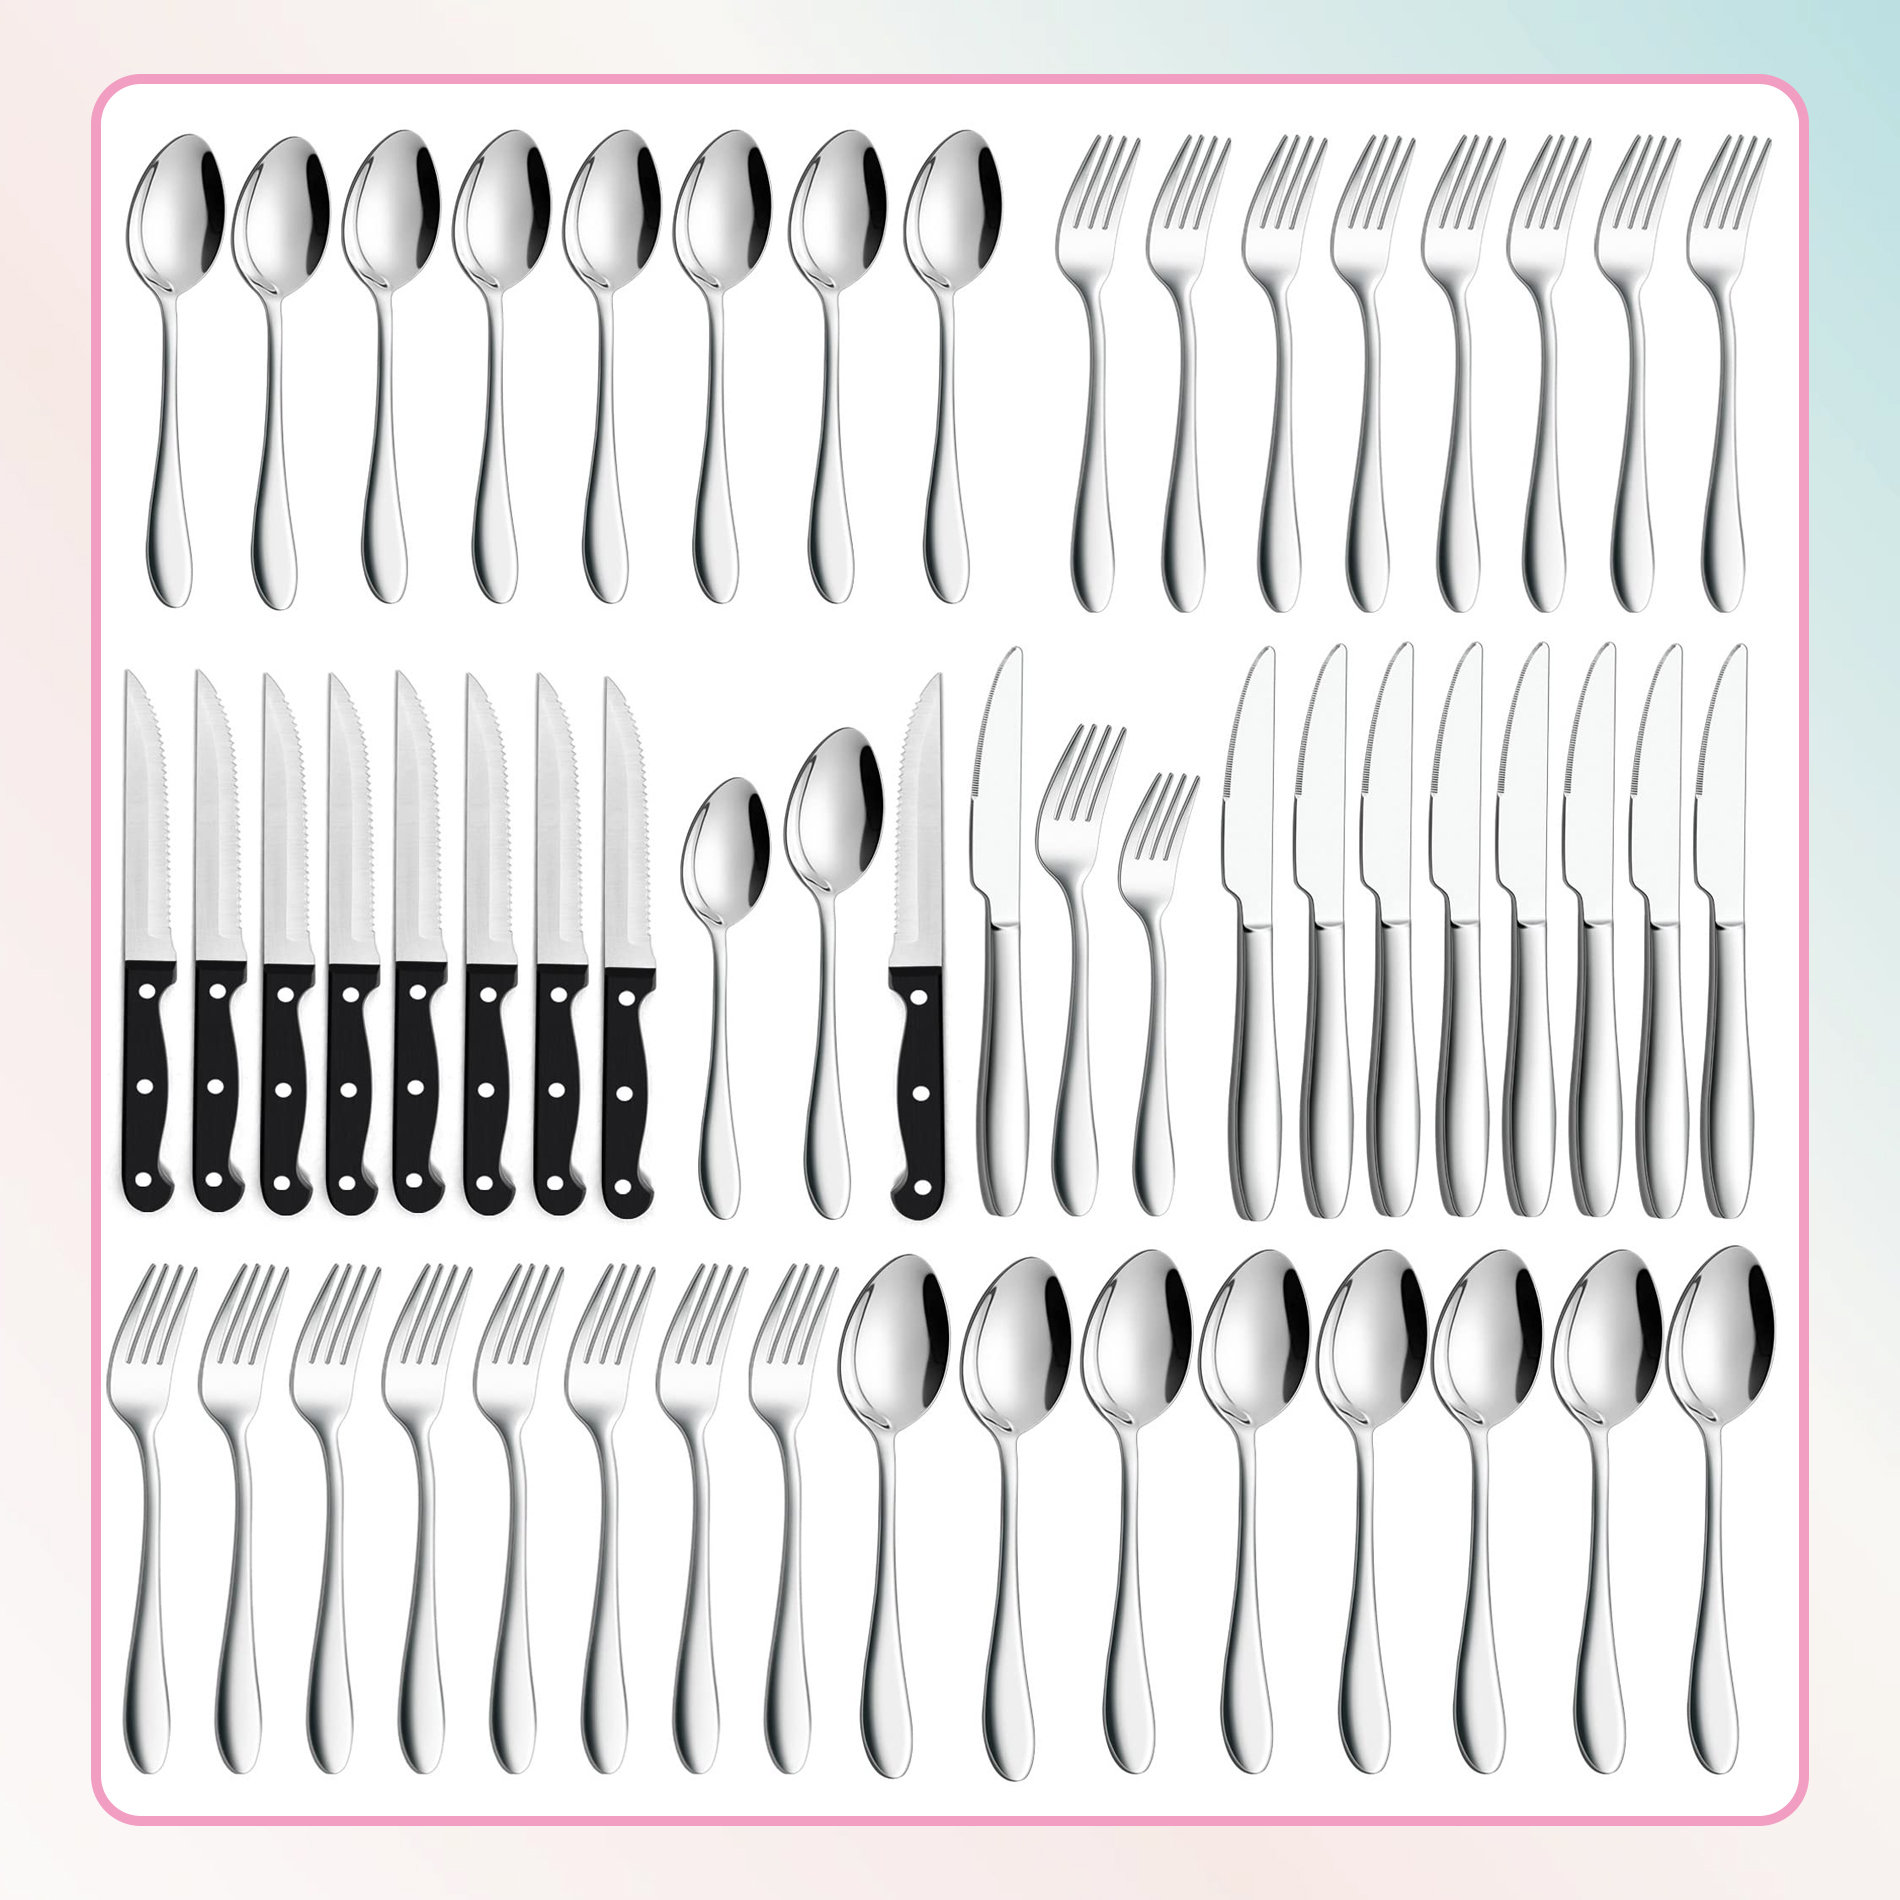 48-Piece Silverware Set with Steak Knives, Stainless Steel